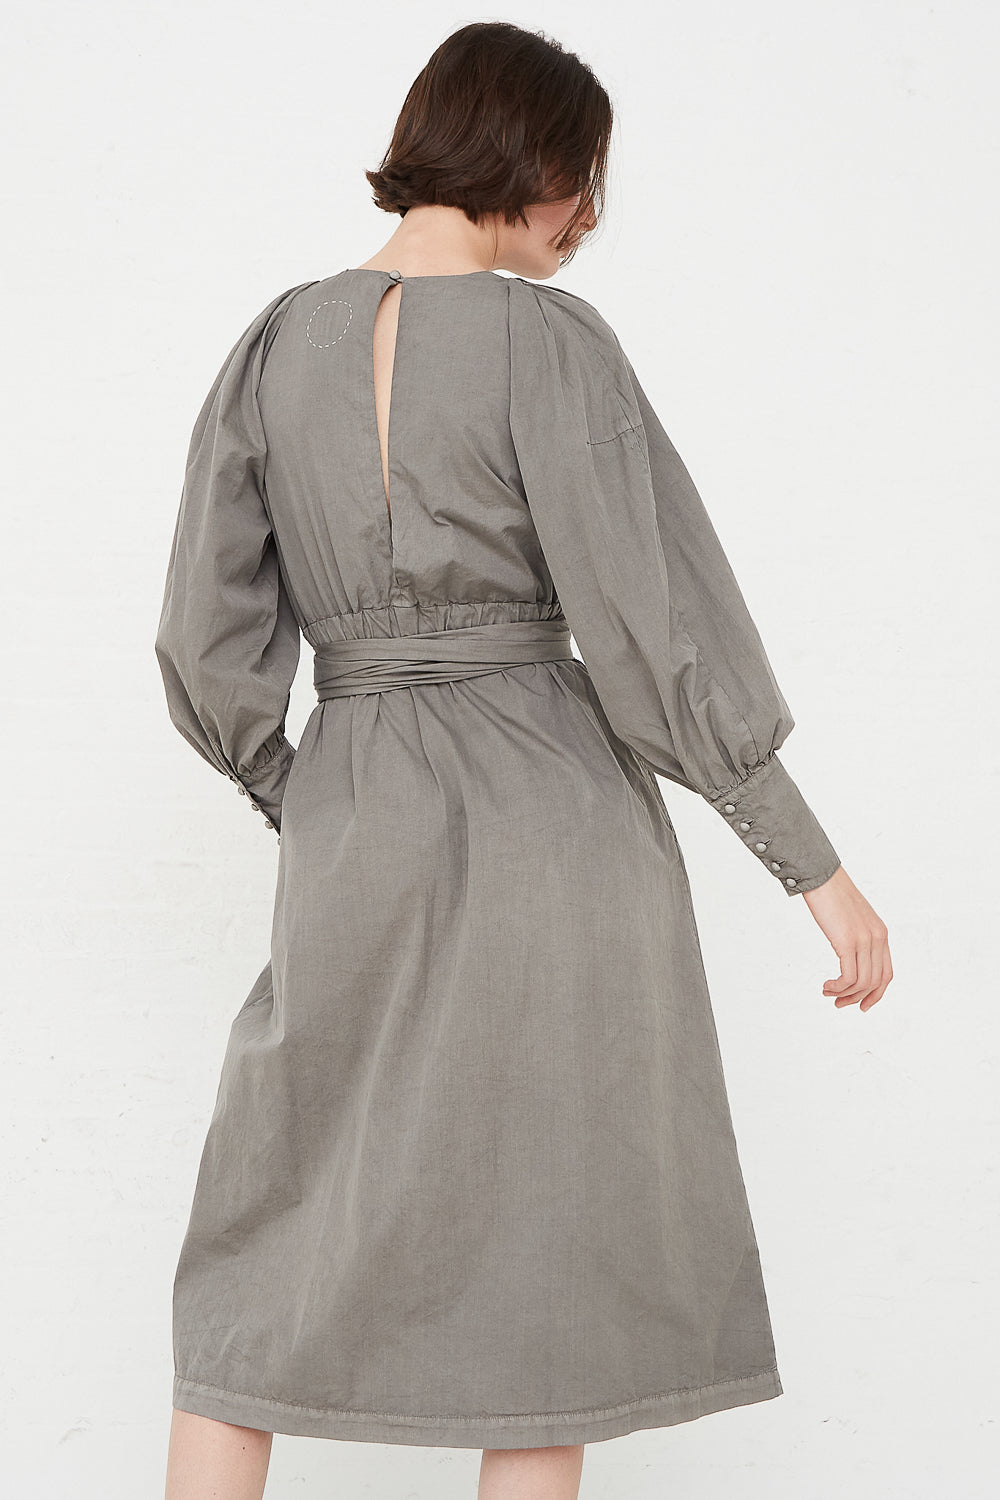 Cosmic Wonder - Suvin Cotton Broadcloth Wrapped Dress in Sumi back view